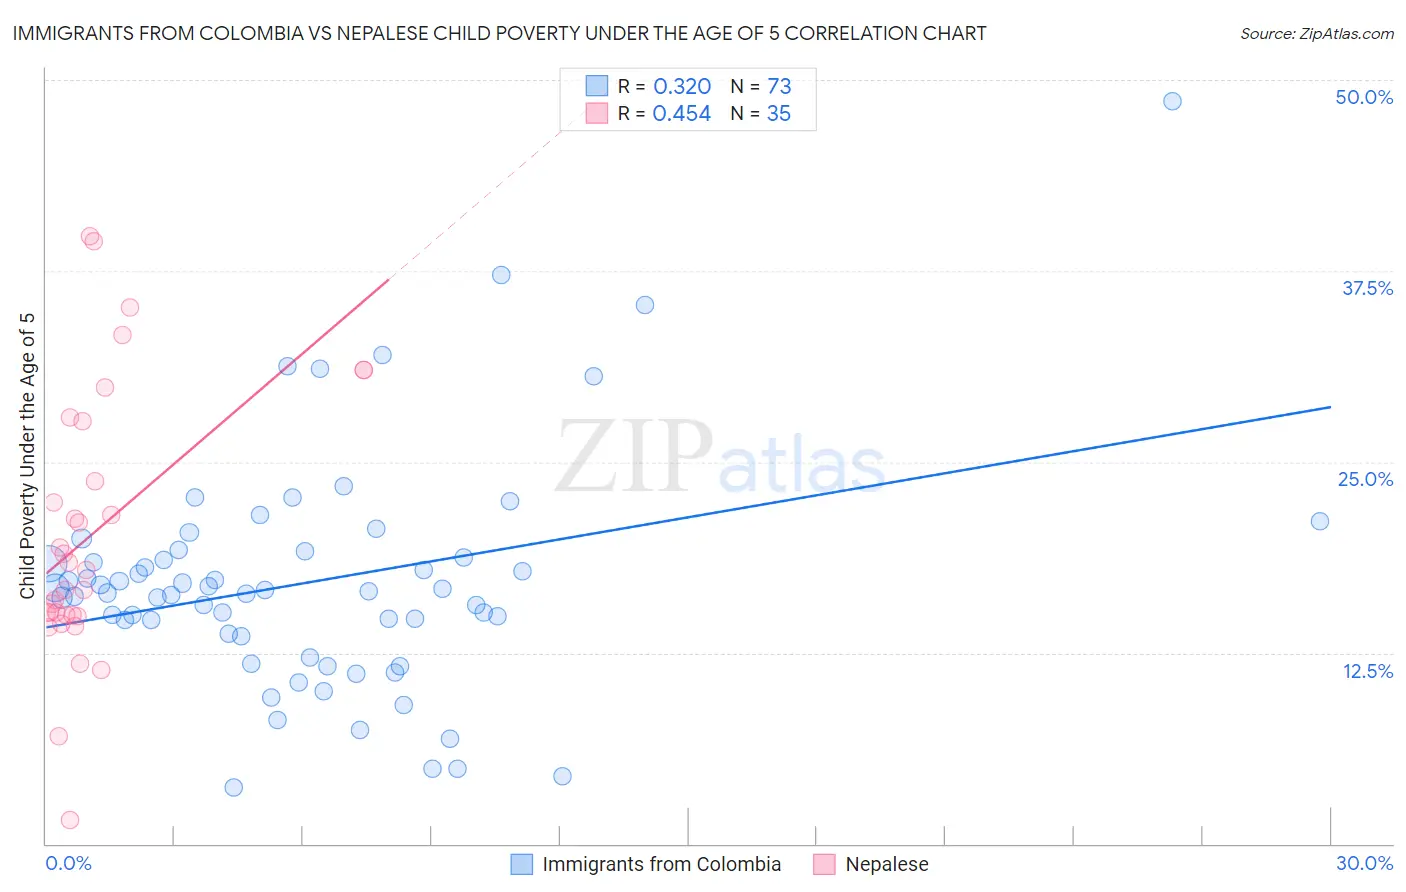 Immigrants from Colombia vs Nepalese Child Poverty Under the Age of 5